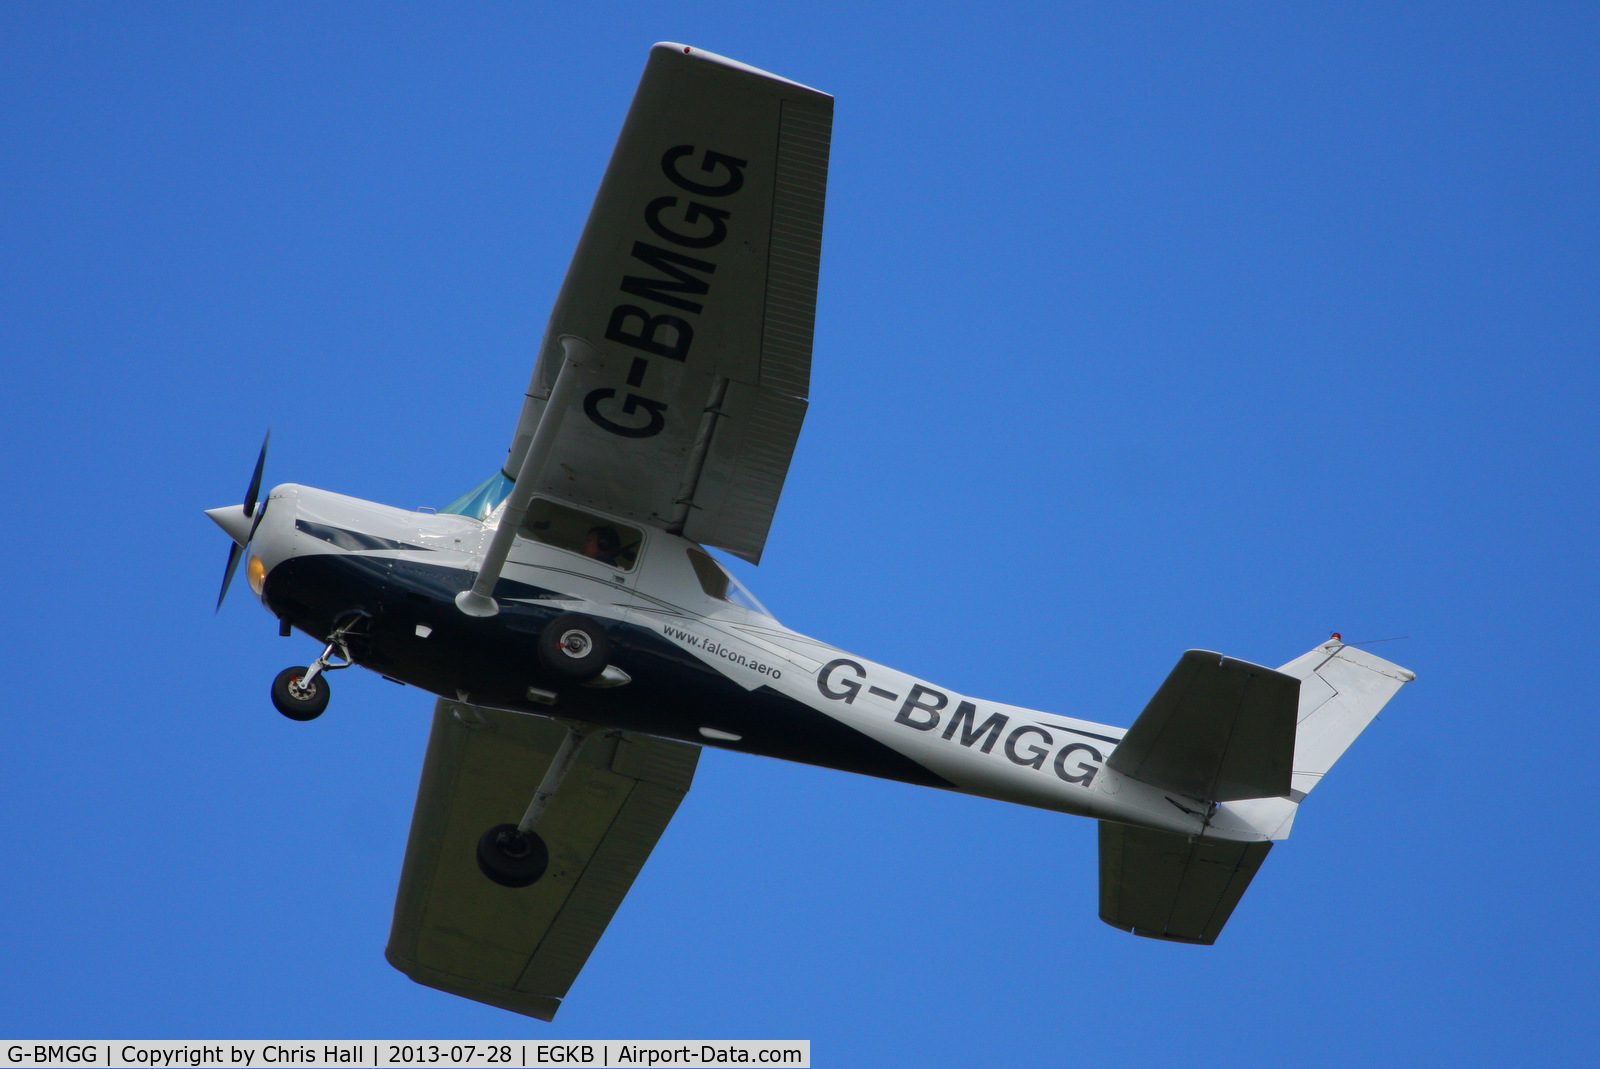 G-BMGG, 1979 Cessna 152 C/N 152-79592, Falcon Flying Services